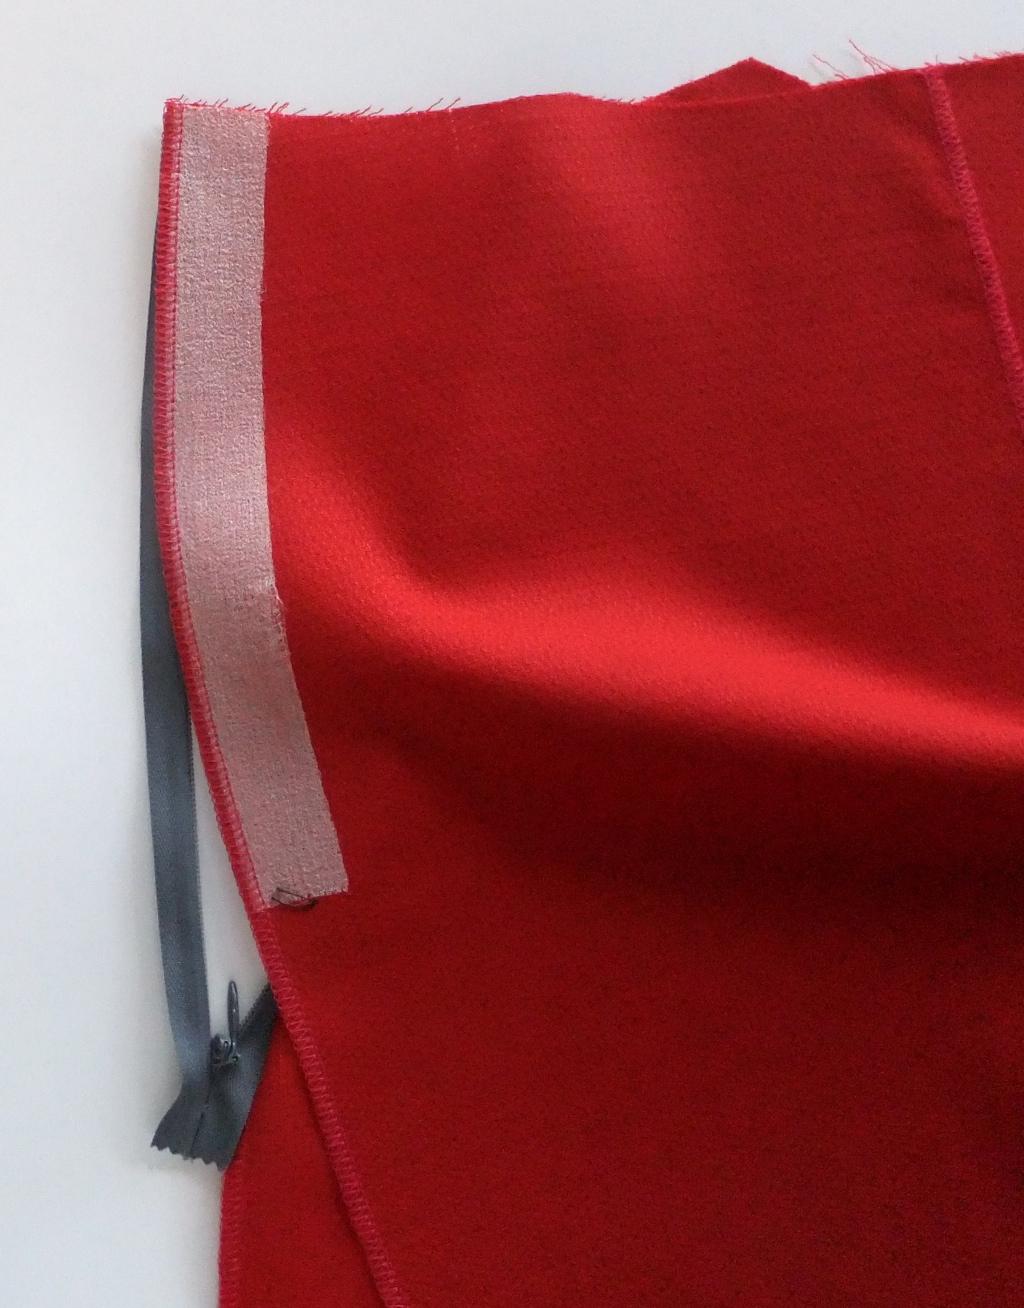 Place the corresponding garment piece over the remaining zipper tape with right sides together.